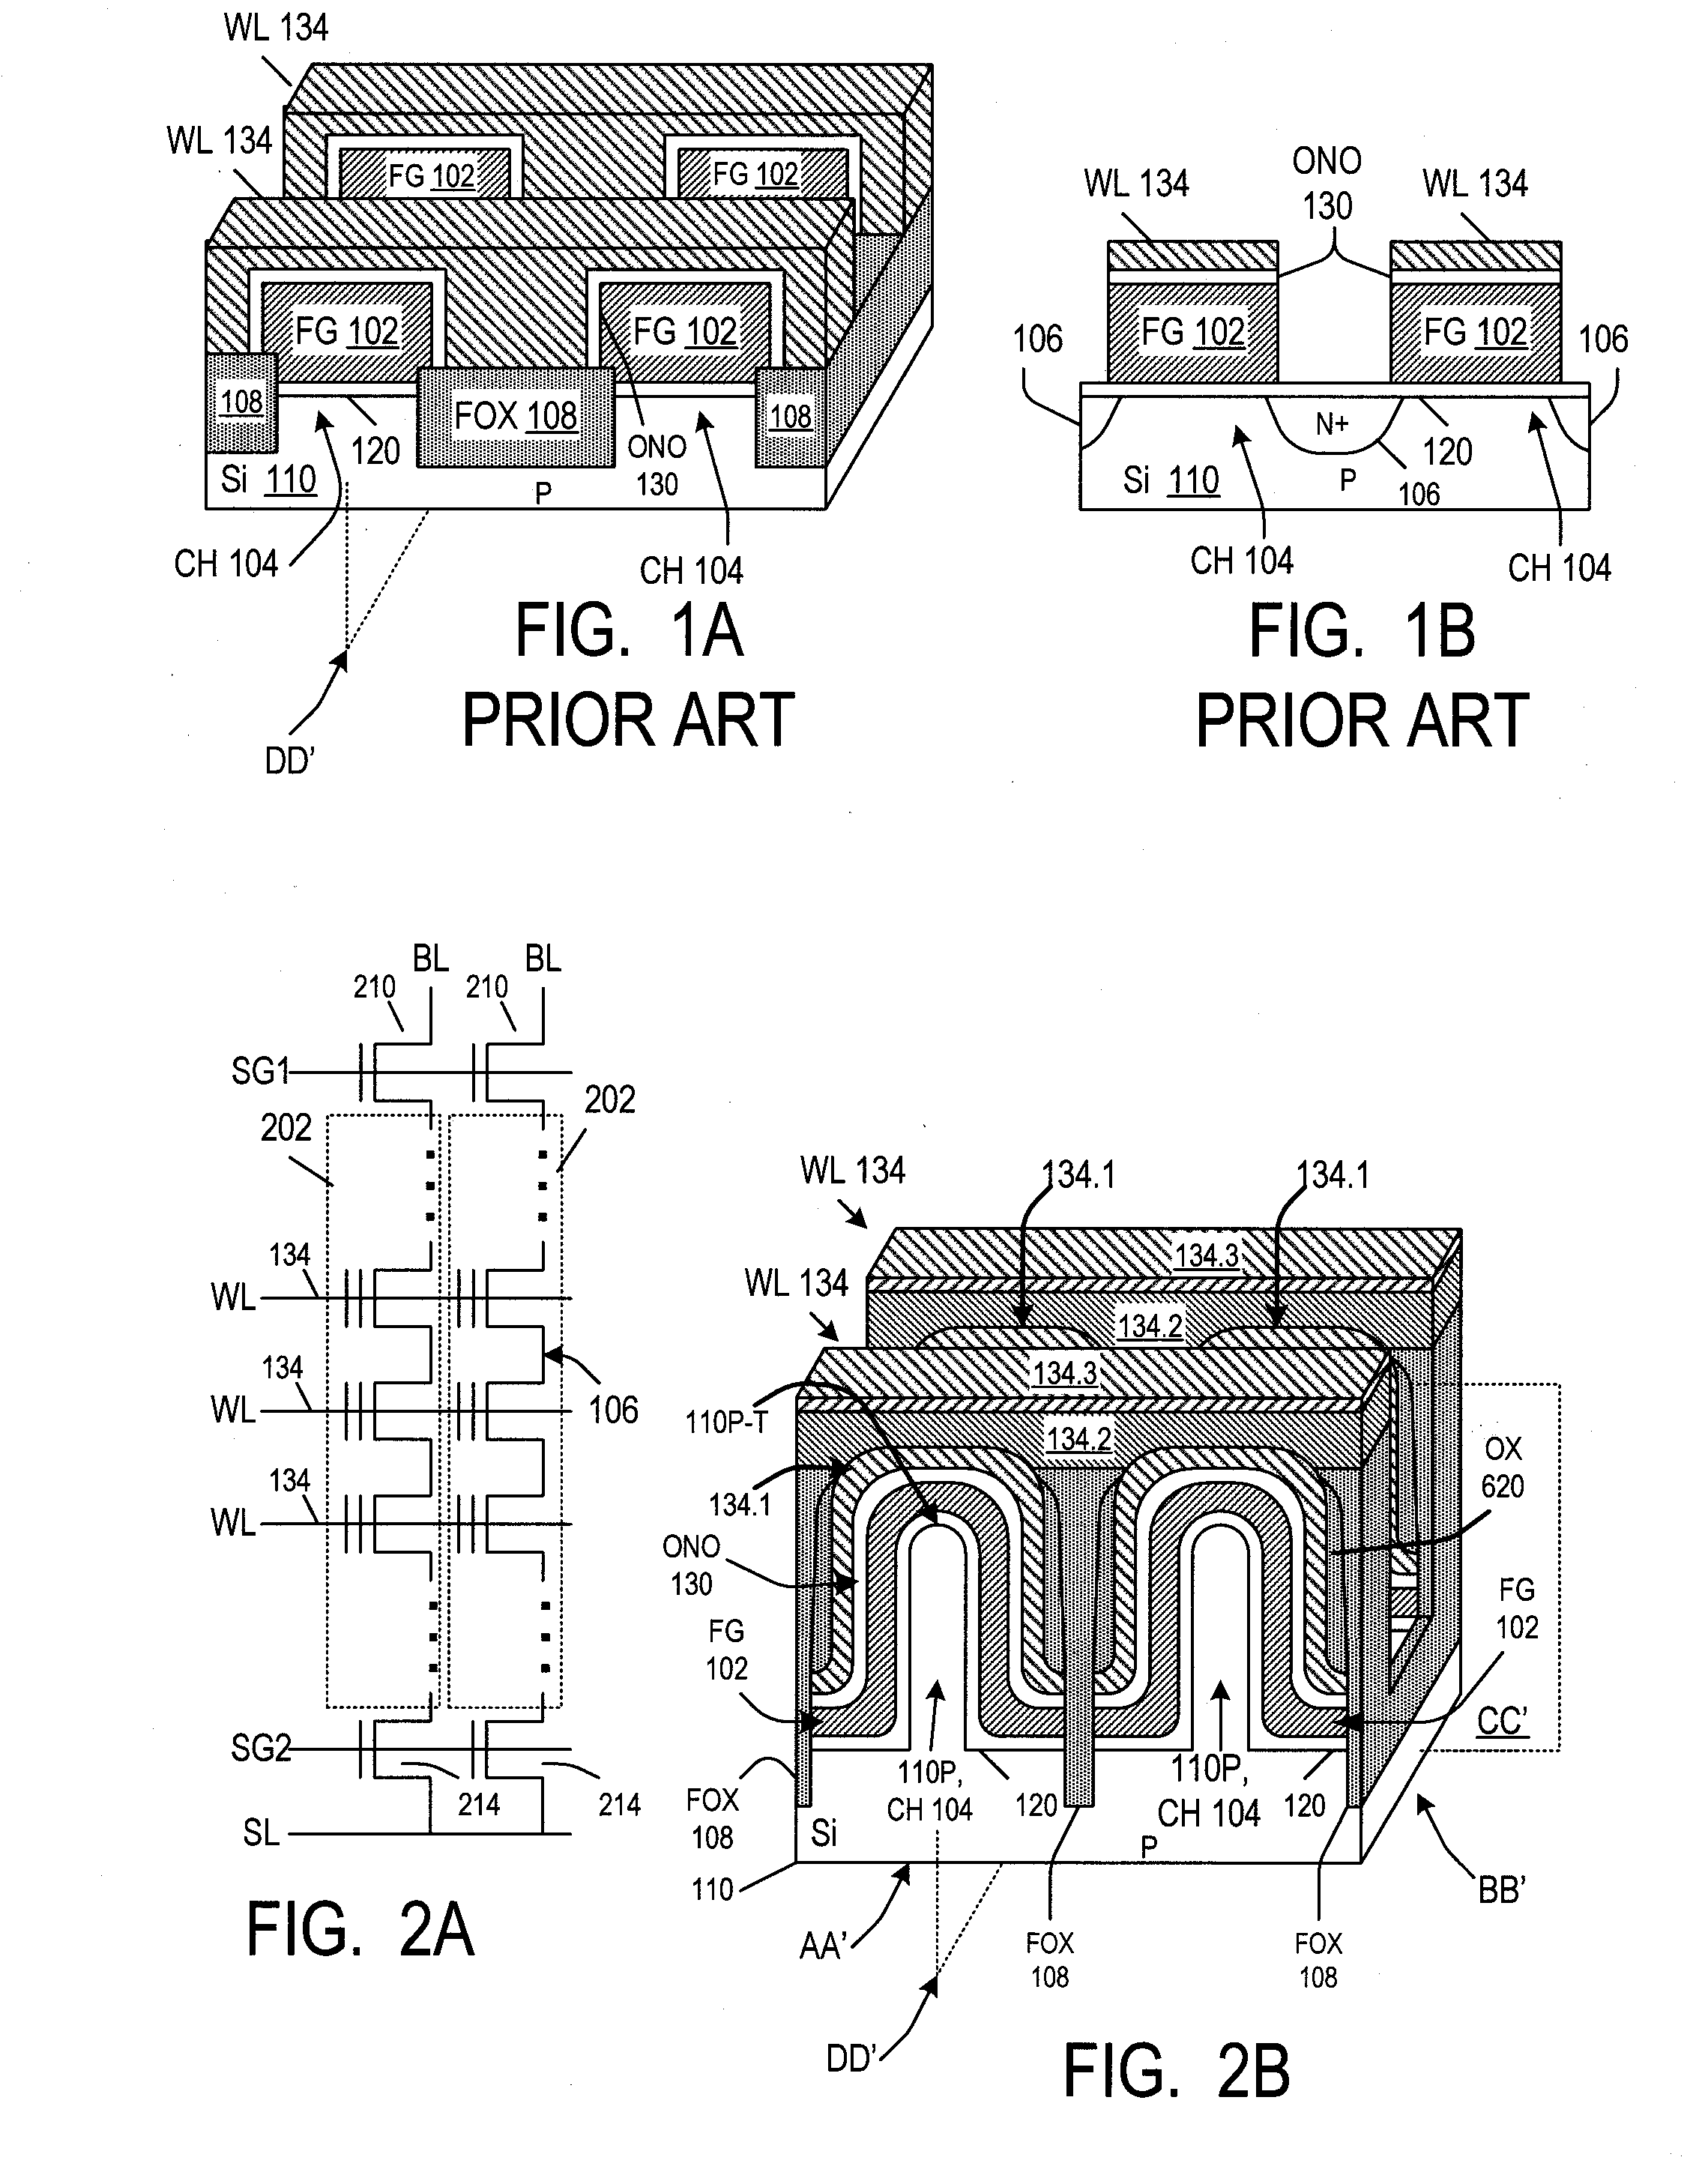 Integrated circuits with substrate protrusions, including (but not limited to) floating gate memories